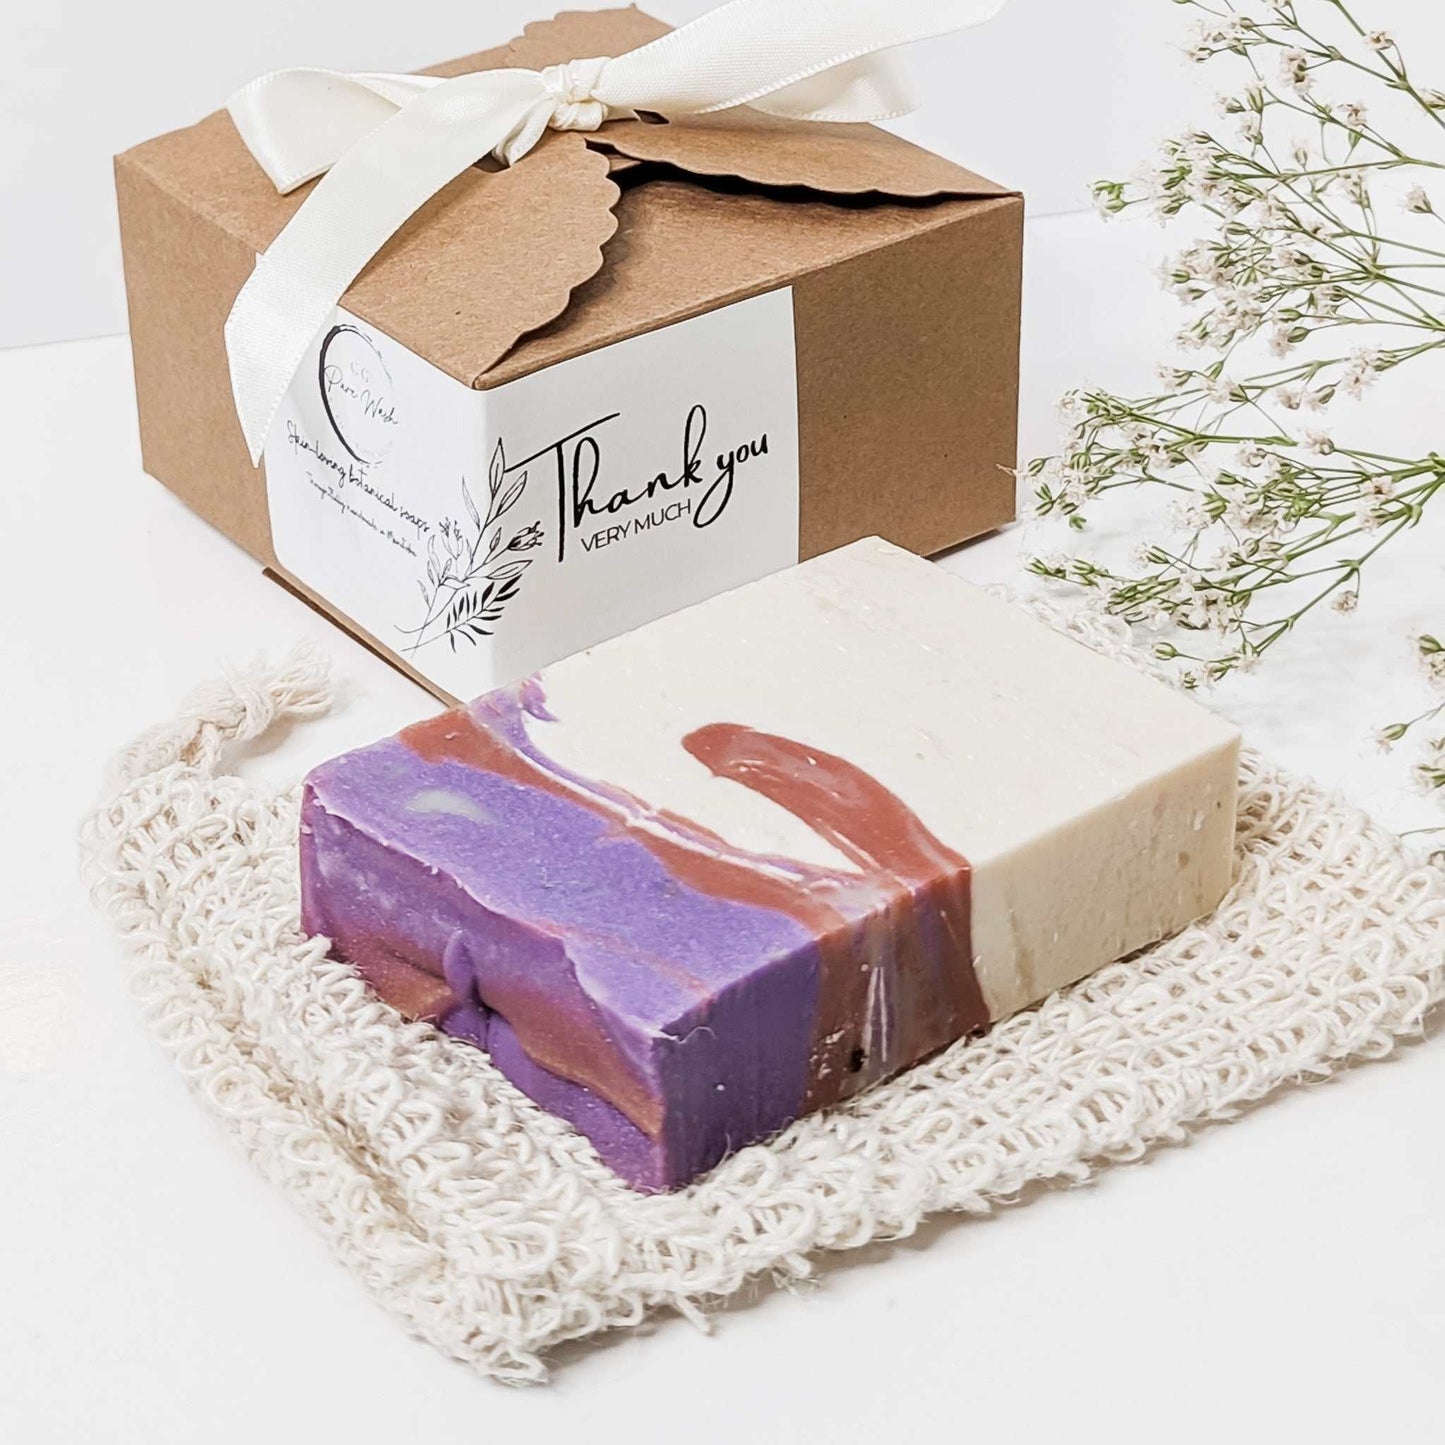 CG Pure Wash's eco-friendly Thank You Gift Box featuring artisanal soap bars